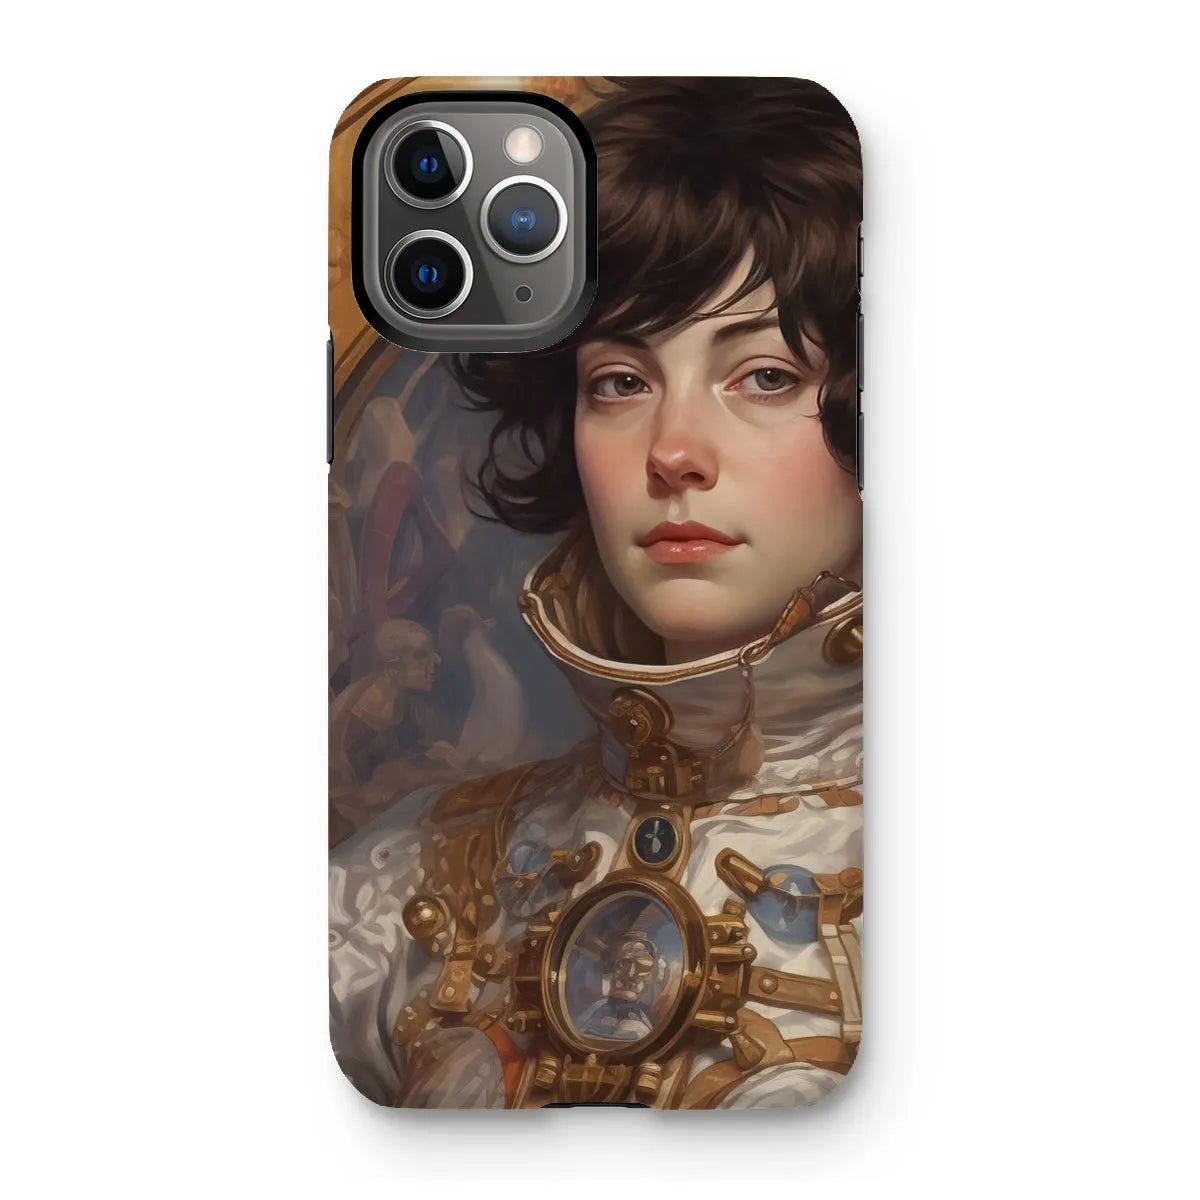 Chloé The Lesbian Astronaut - Space Aesthetic Art Phone Case - Iphone 11 Pro / Matte - Mobile Phone Cases - Aesthetic